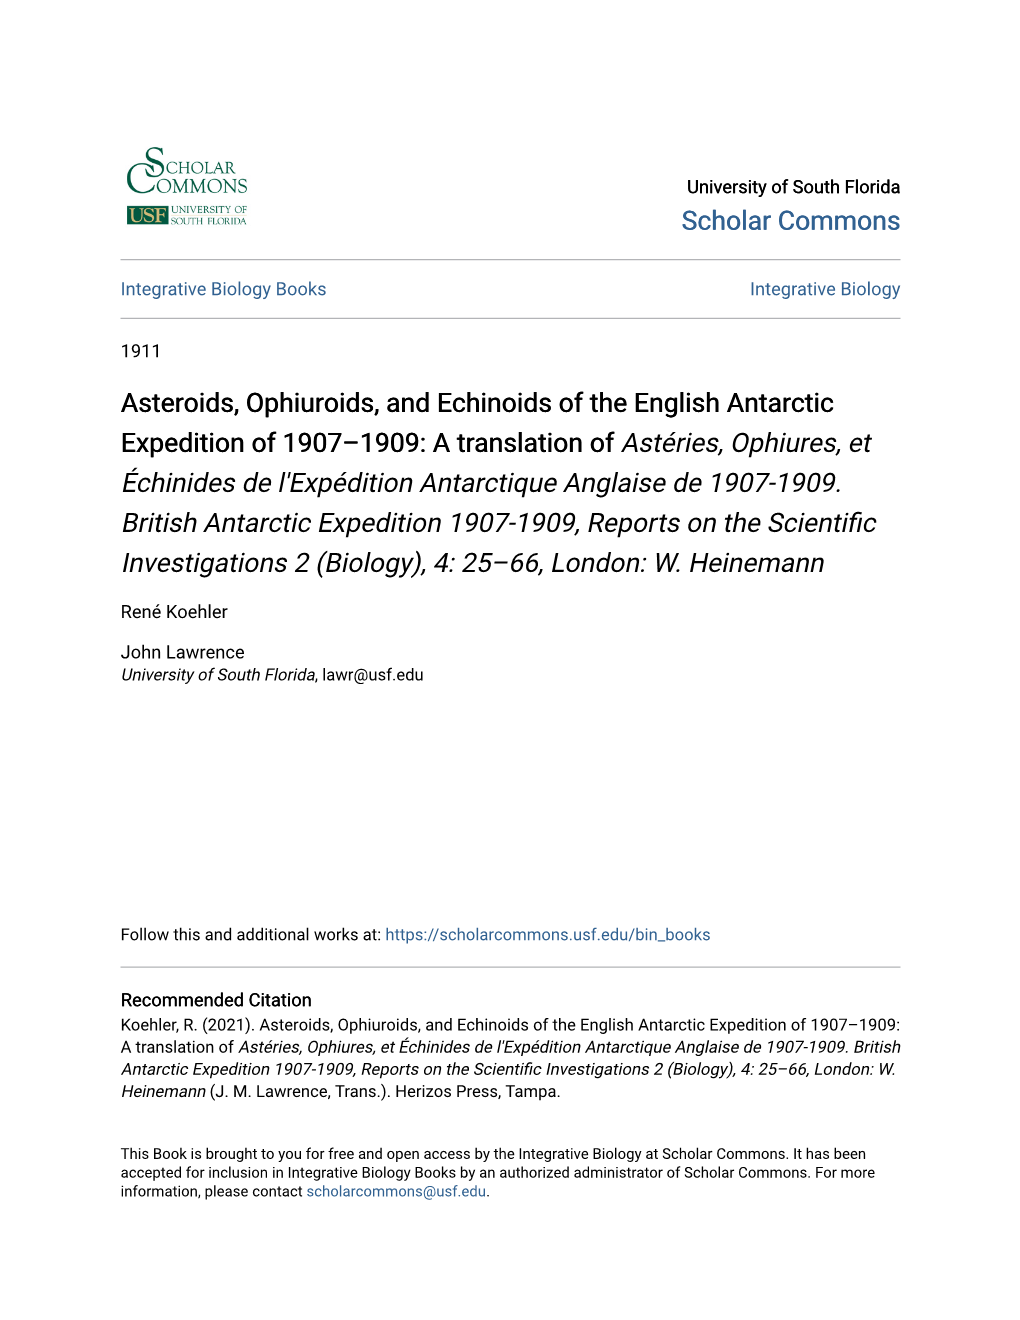 Asteroids, Ophiuroids, and Echinoids of the English Antarctic